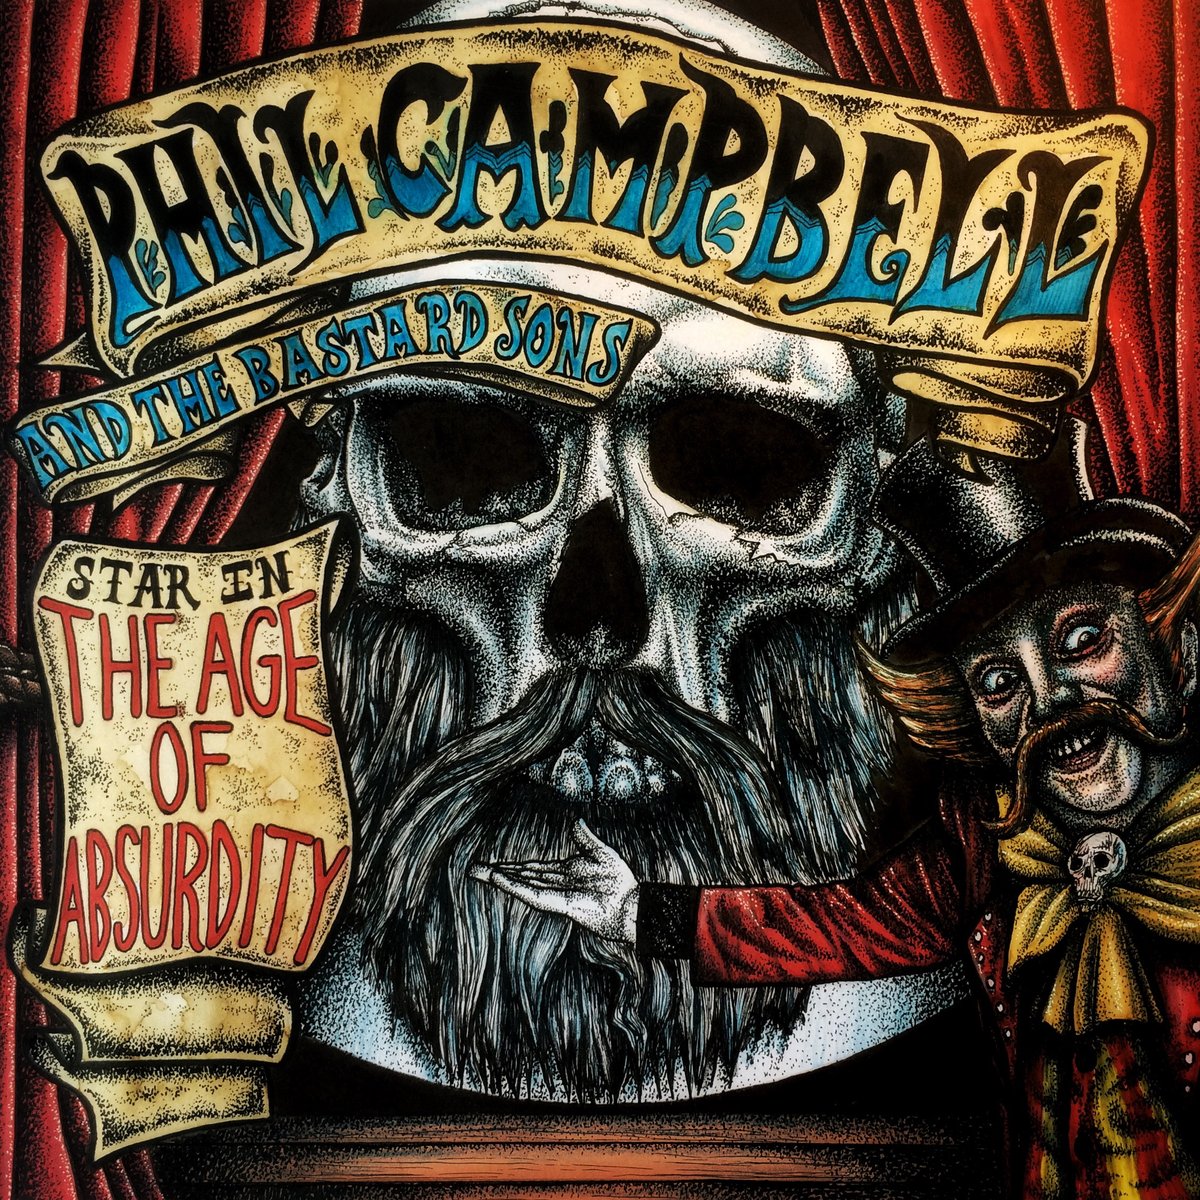 PHILL CAMPBELL & THE BASTARD SONS „STAR IN THE AGE OF ABSURDITY” (2018) - PHILL CAMPBELL & THE BASTARD SONS „STAR IN THE AGE OF ABSURDITY” (2018)